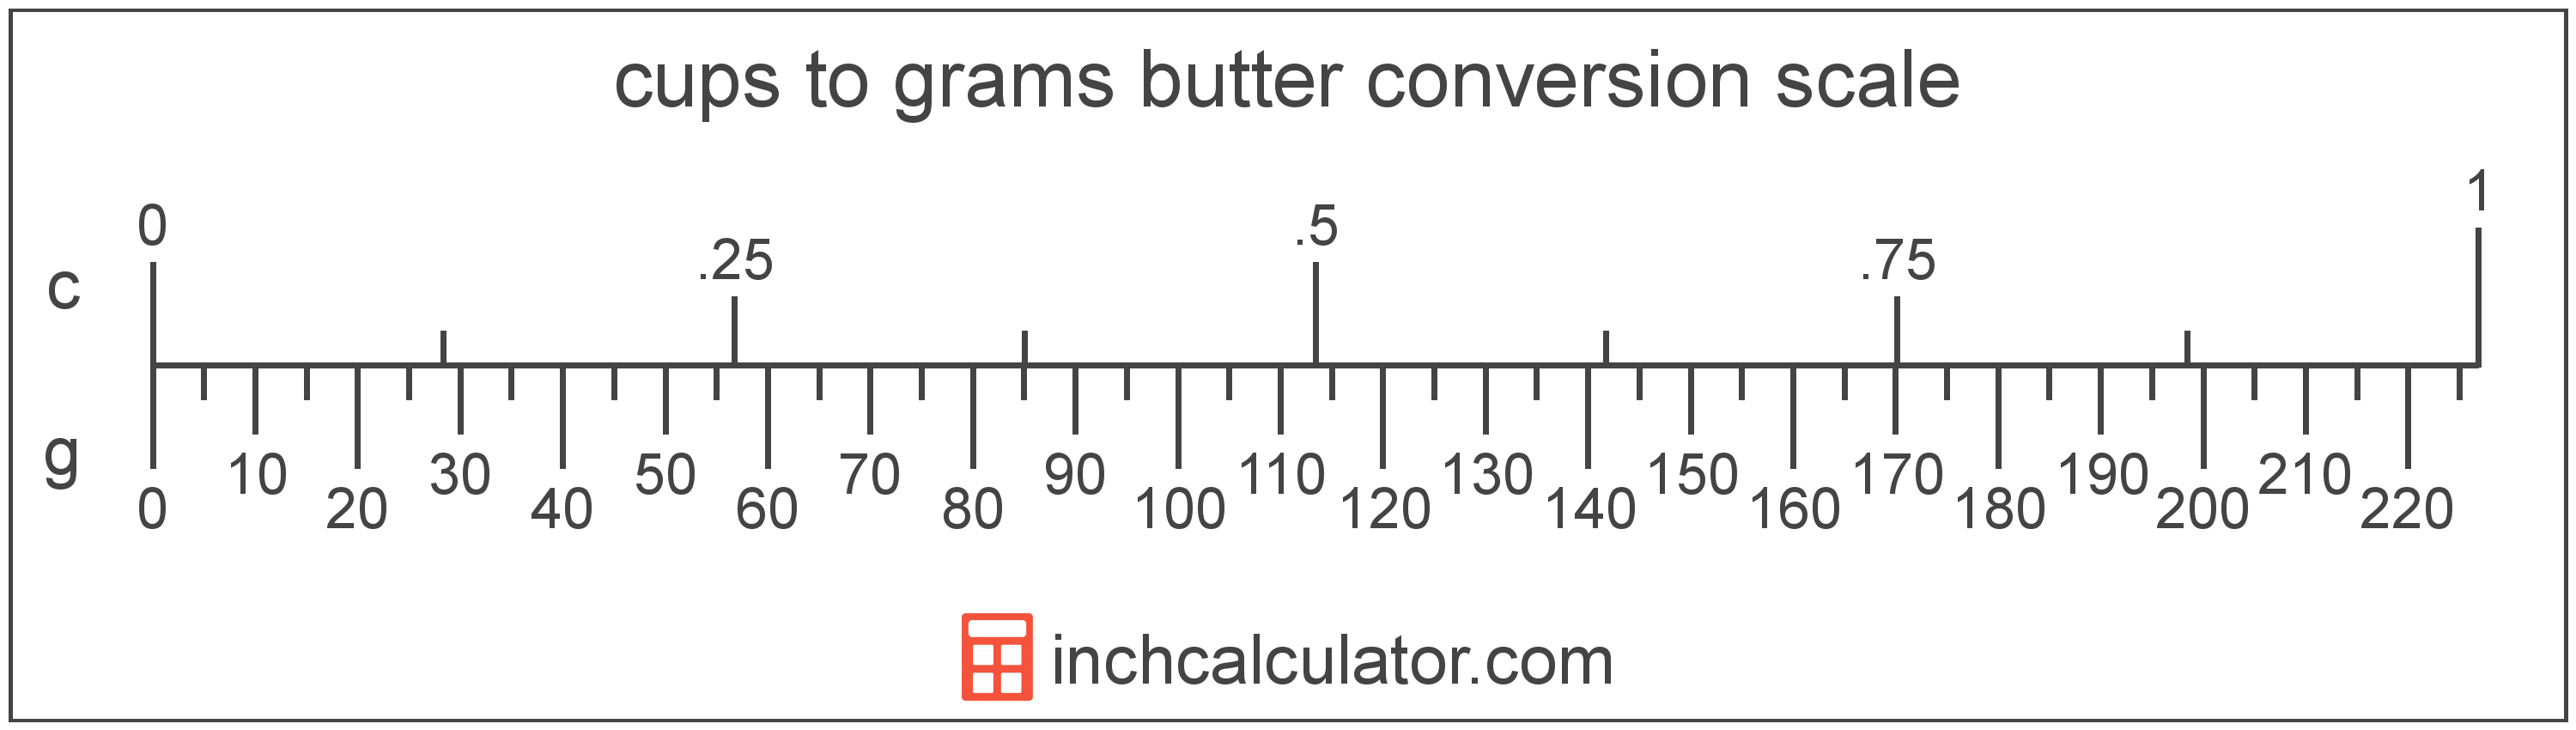 conversion scale showing cups and equivalent grams butter values